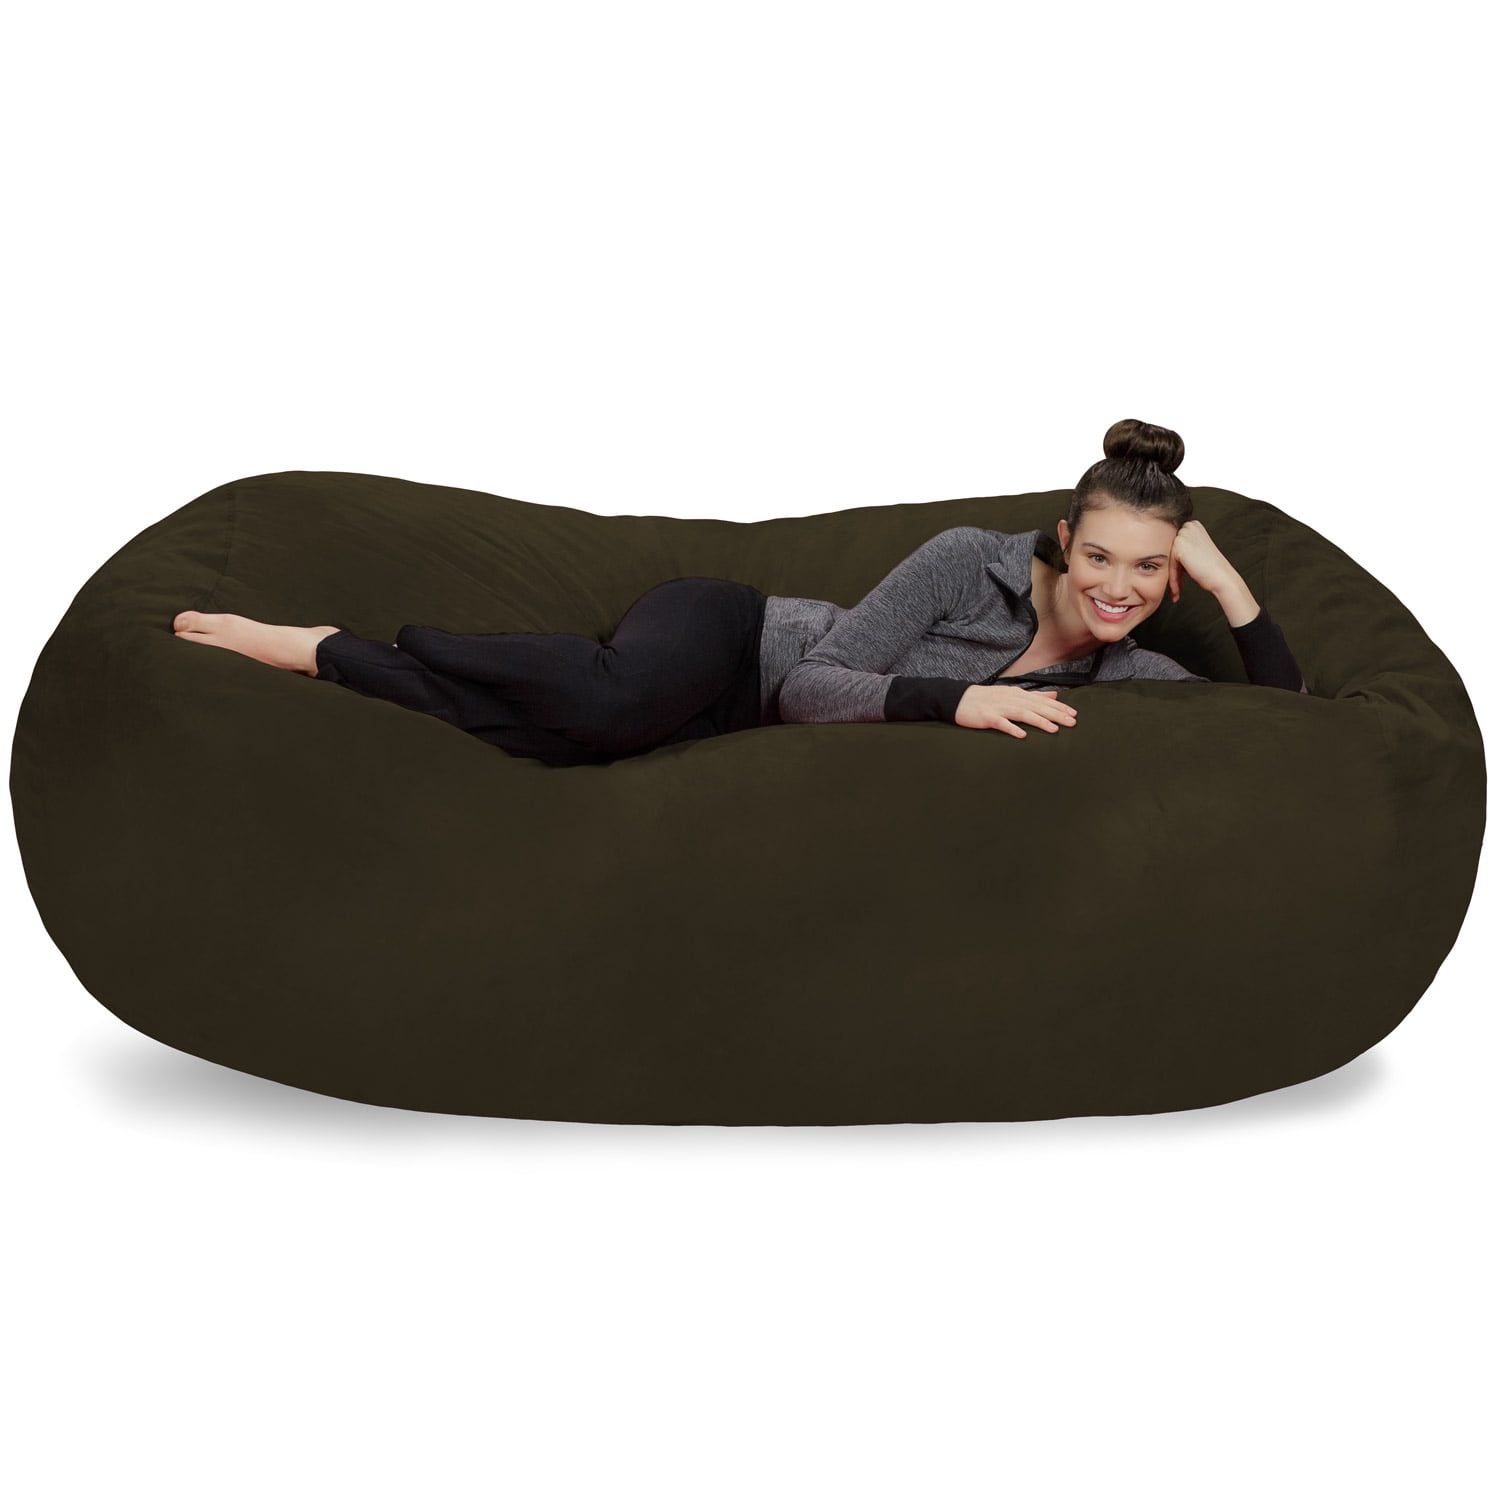 Large Bean Bag Chair & Lounger, Warranty Details: Applies to cover seams,  Foam Bag Fill: 